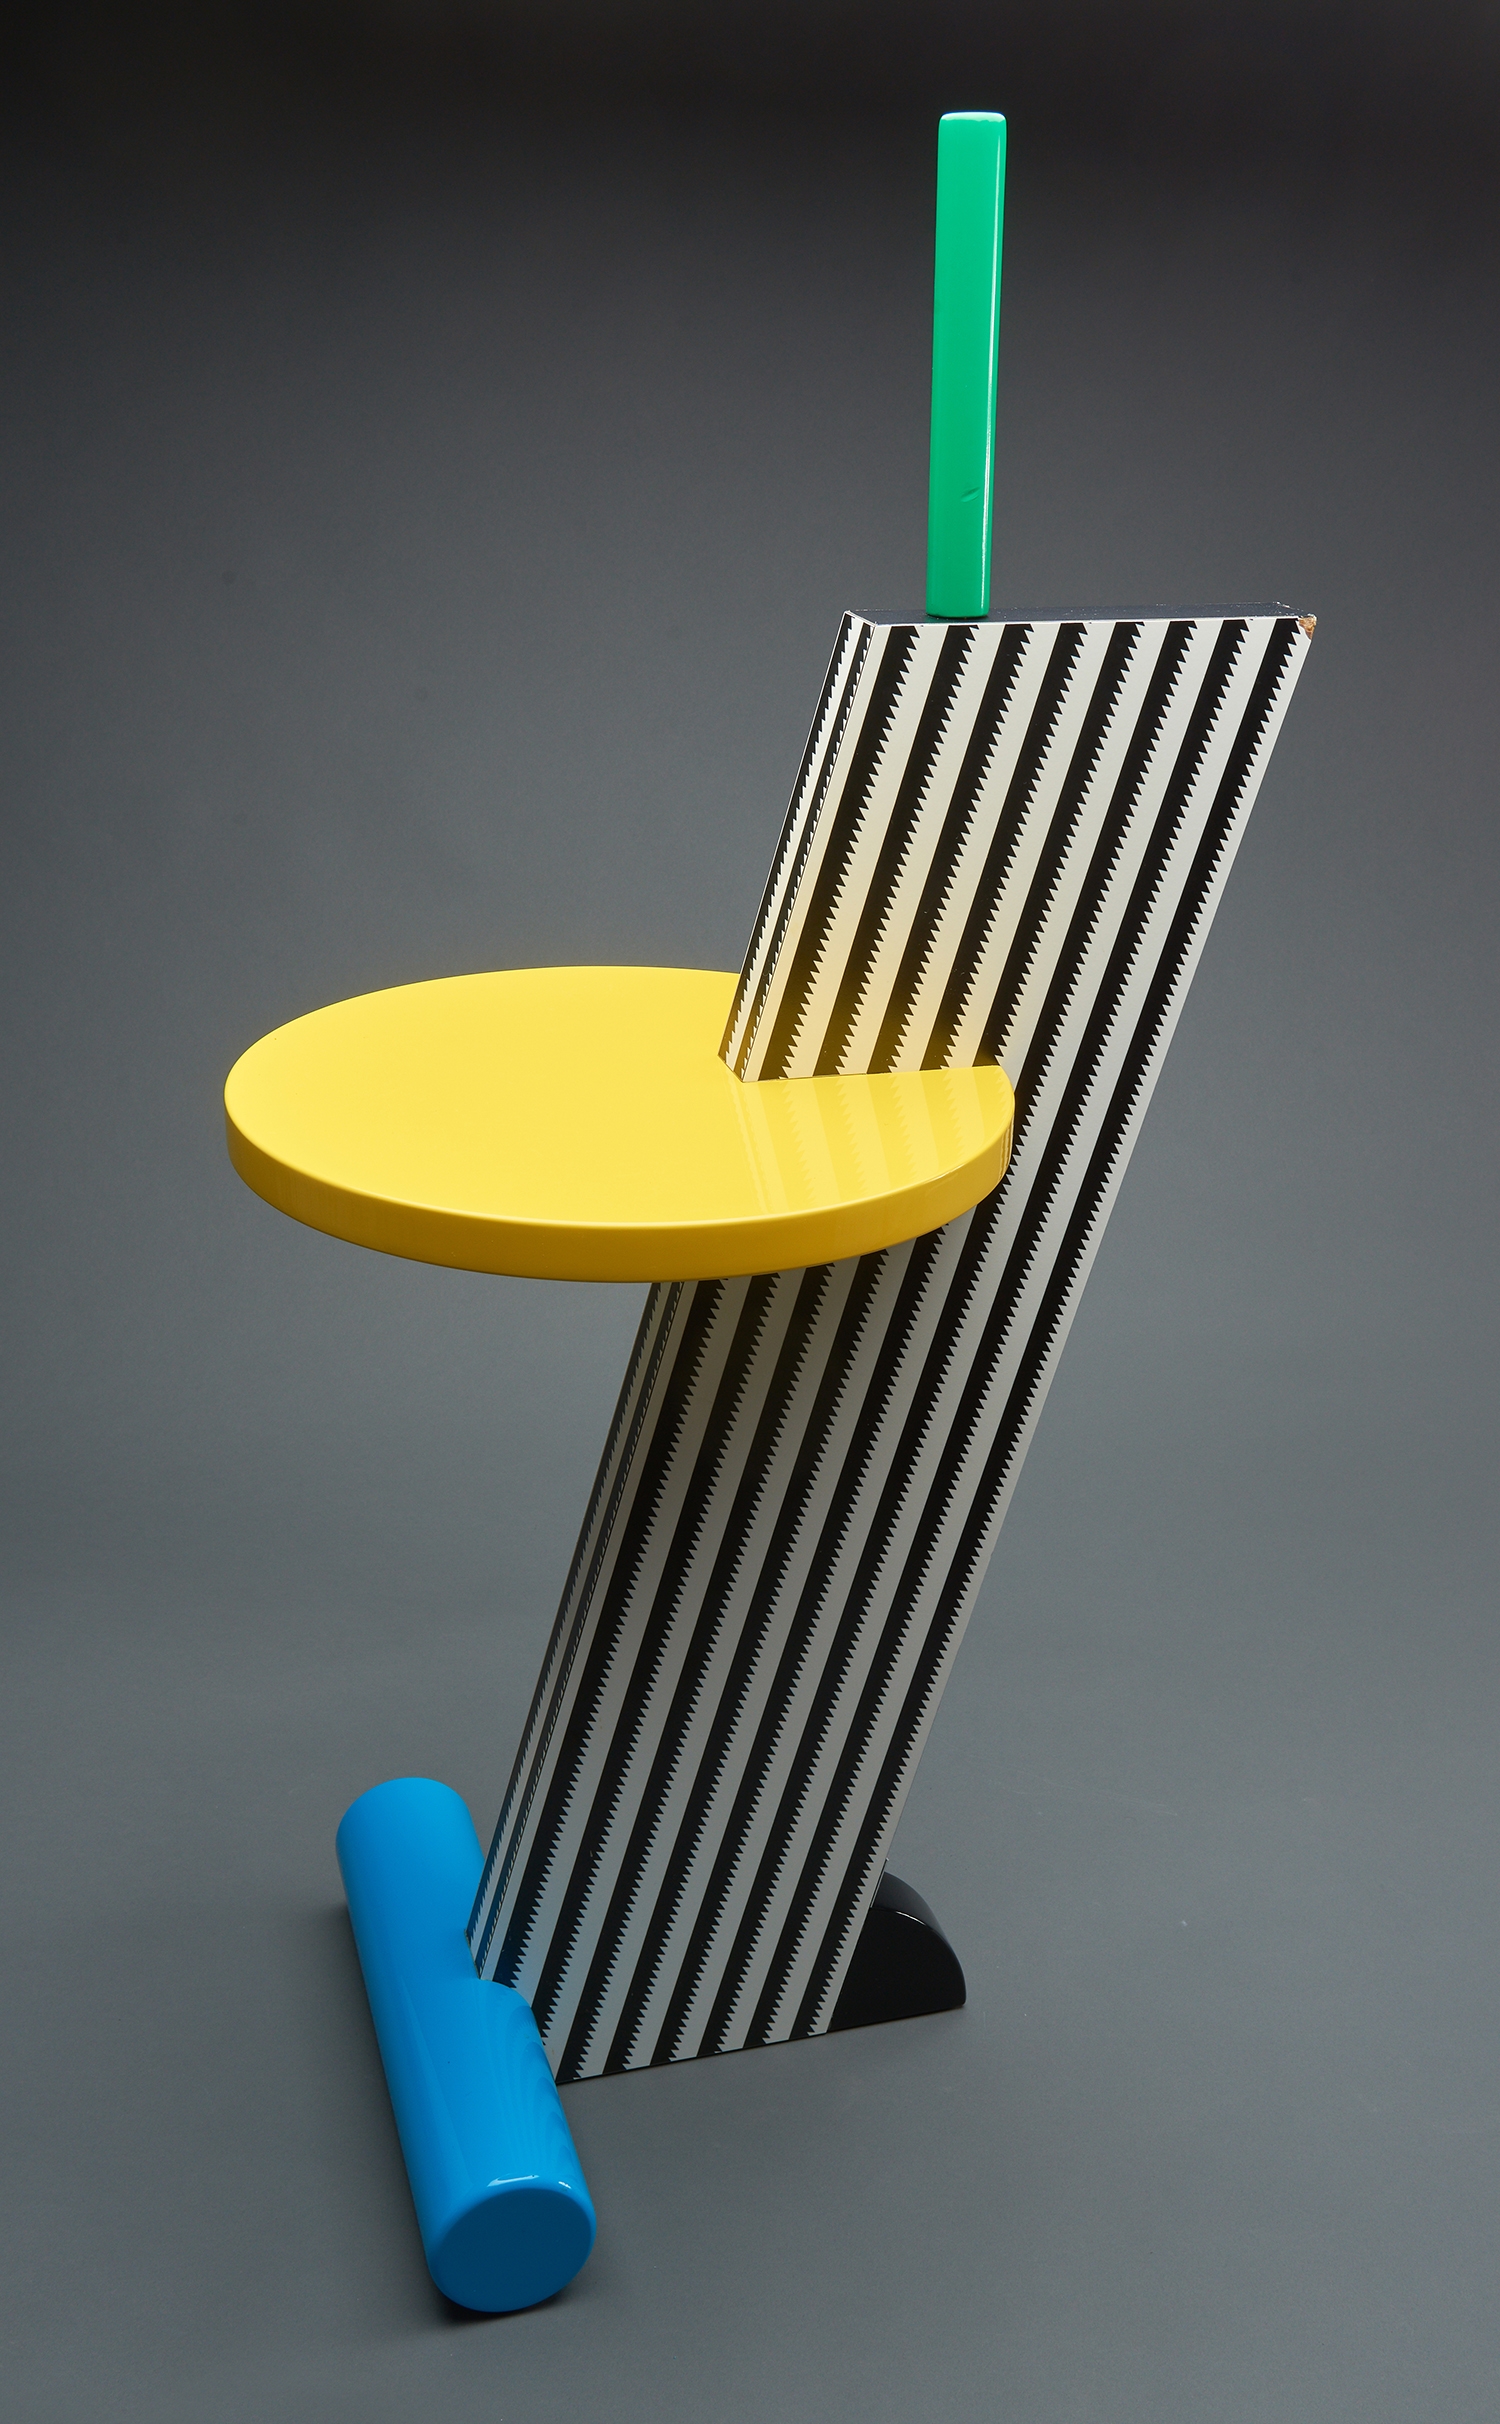 Artwork by Michele de Lucchi, 'FLAMINGO' TABLE FOR MEMPHIS MILANO, Made of Painted wood